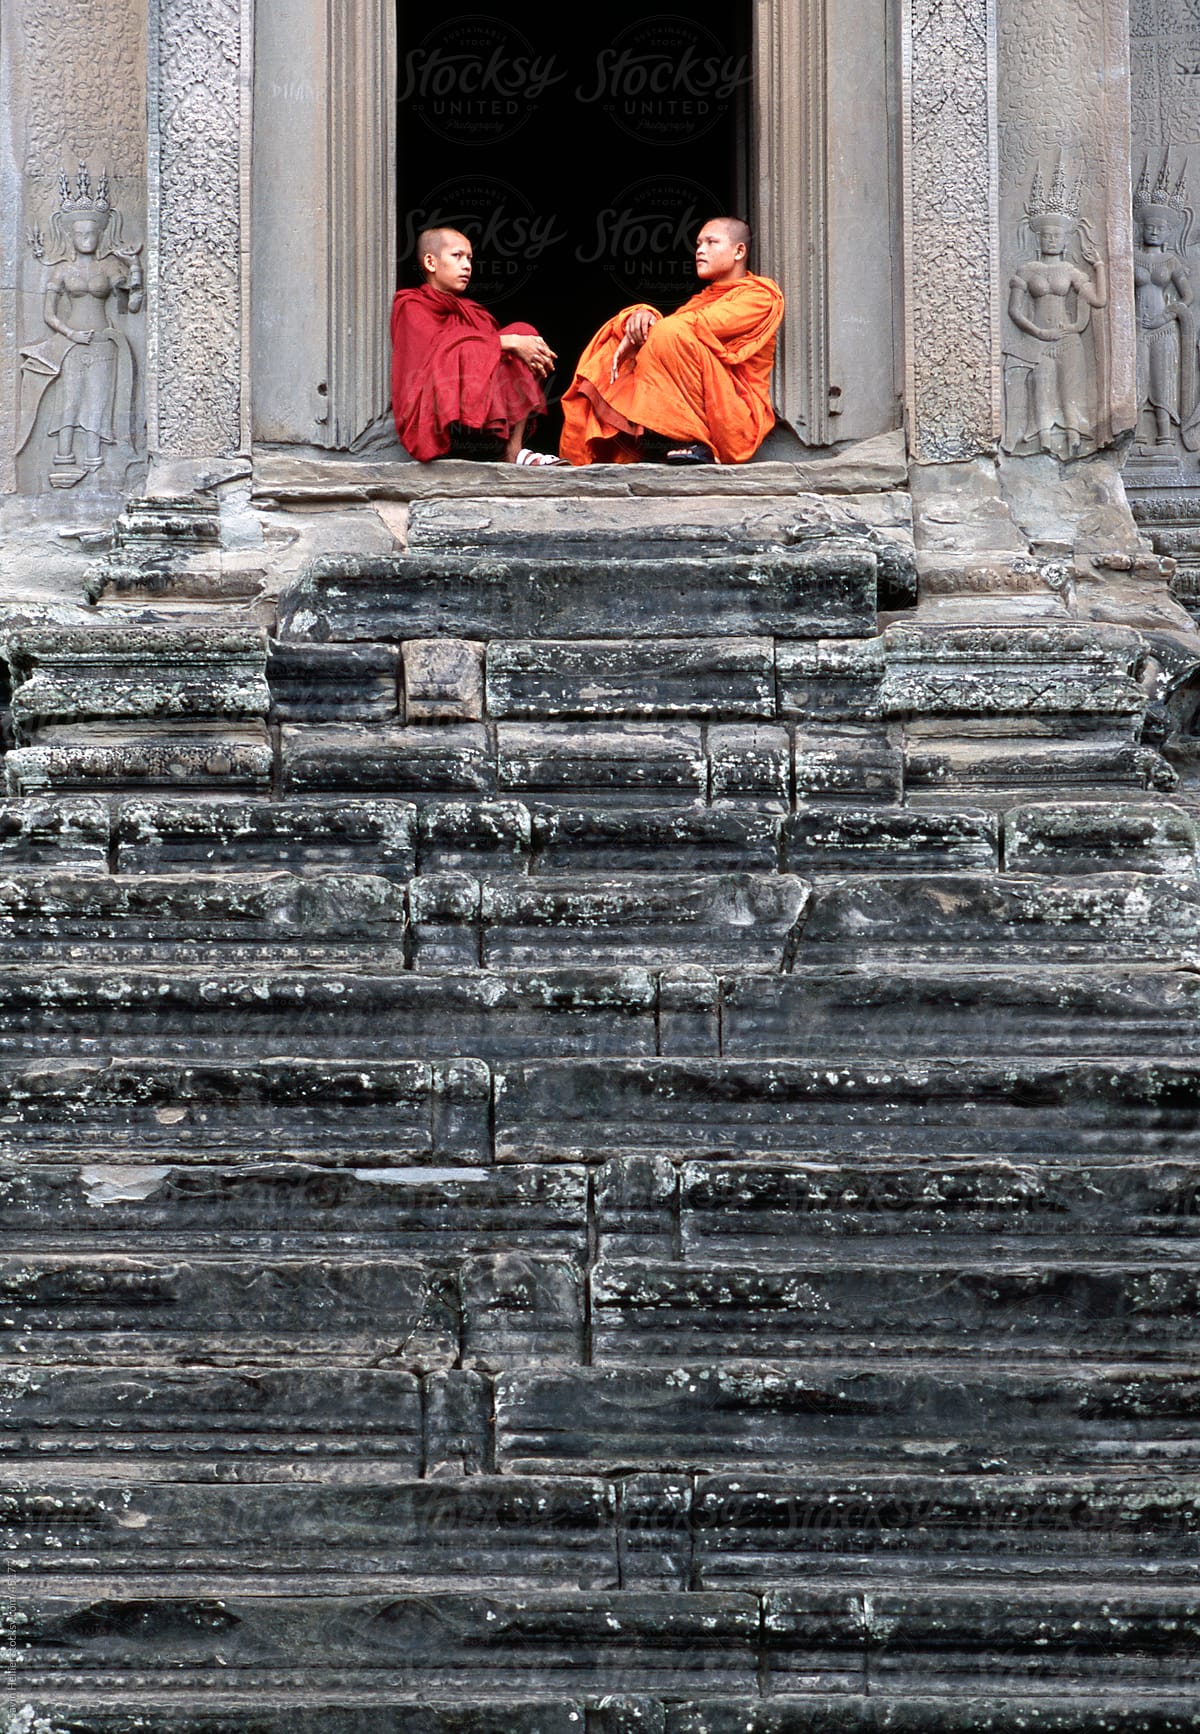 Monks on steps, Angkor Wat, Siem Reap, Cambodia, Indochina, Asia